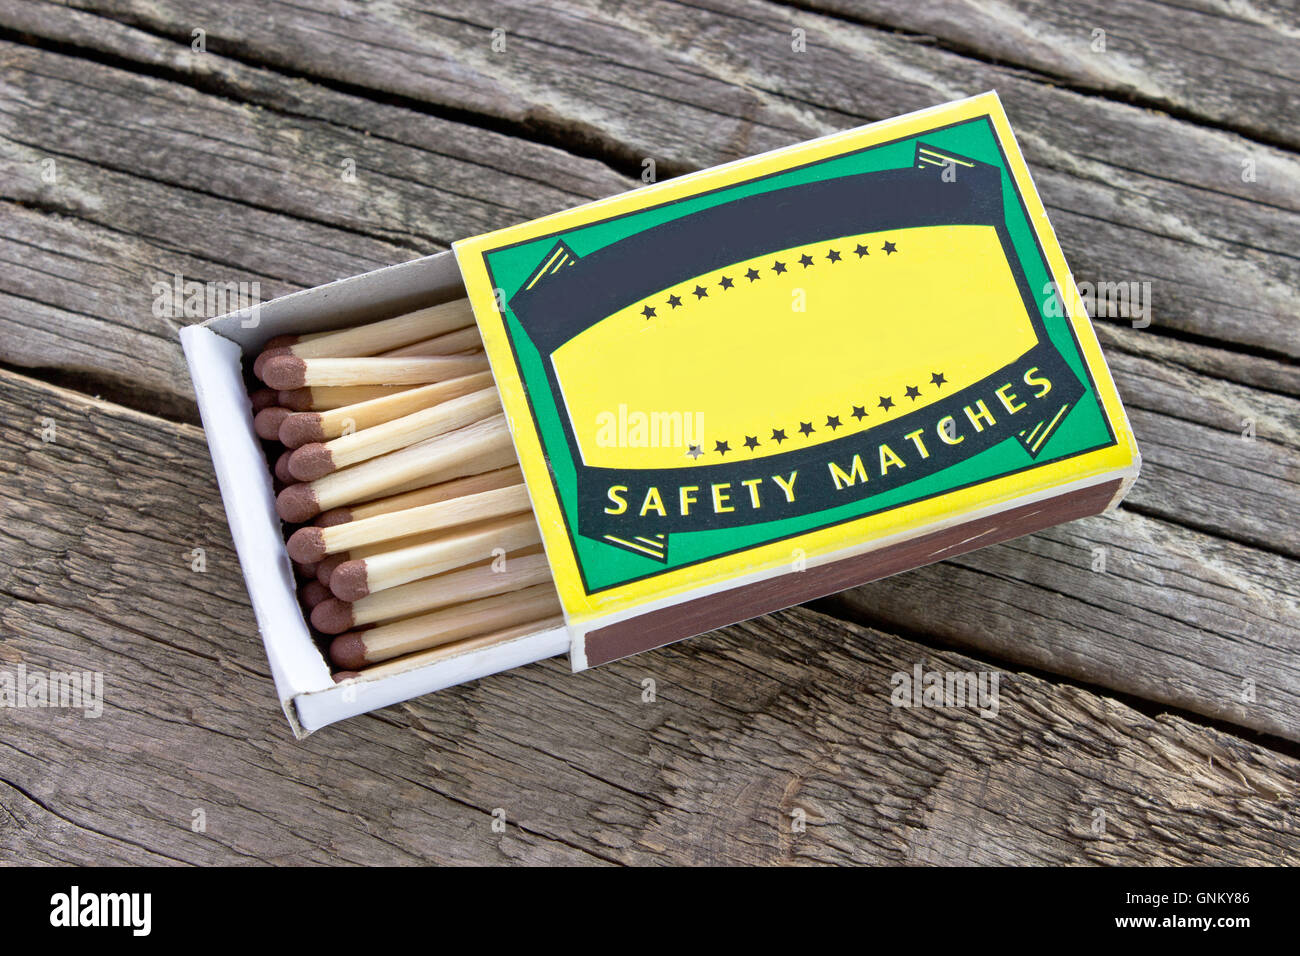 Matches box on wooden background Stock Photo